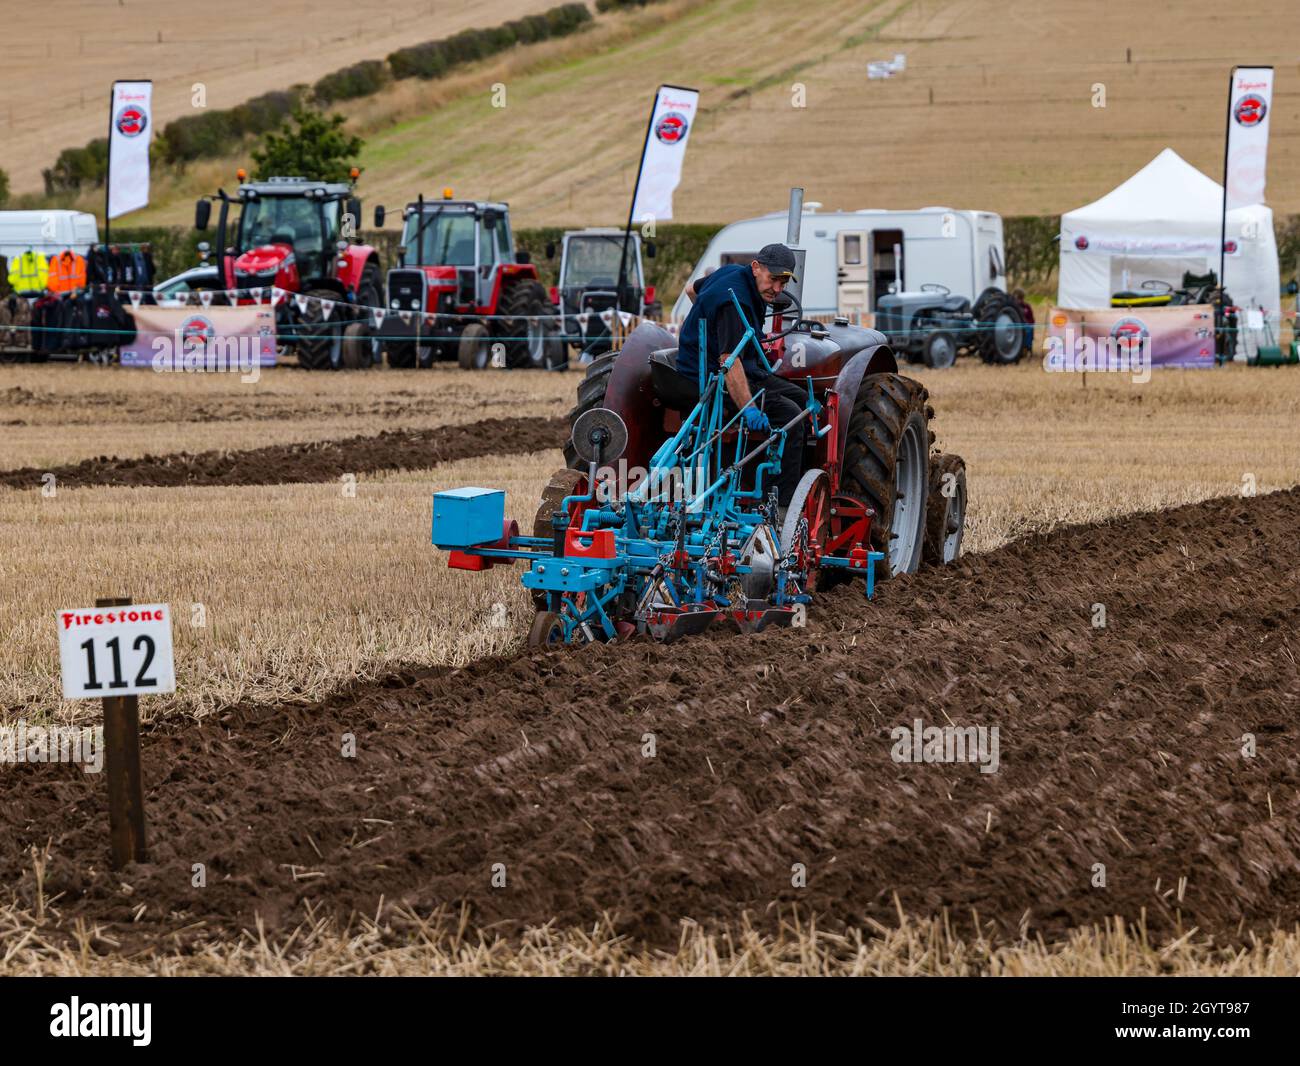 Mindrum Mill, Northumberland, UK. 09 October 2021. British Ploughing Championships: the 70th championships, cancelled due to Covid-19 last year, take place. A variety of tractor classes and ploughs compete for prizes over the two day event. Pictured: the oat seed furrow ploughing by tractor. Stock Photo